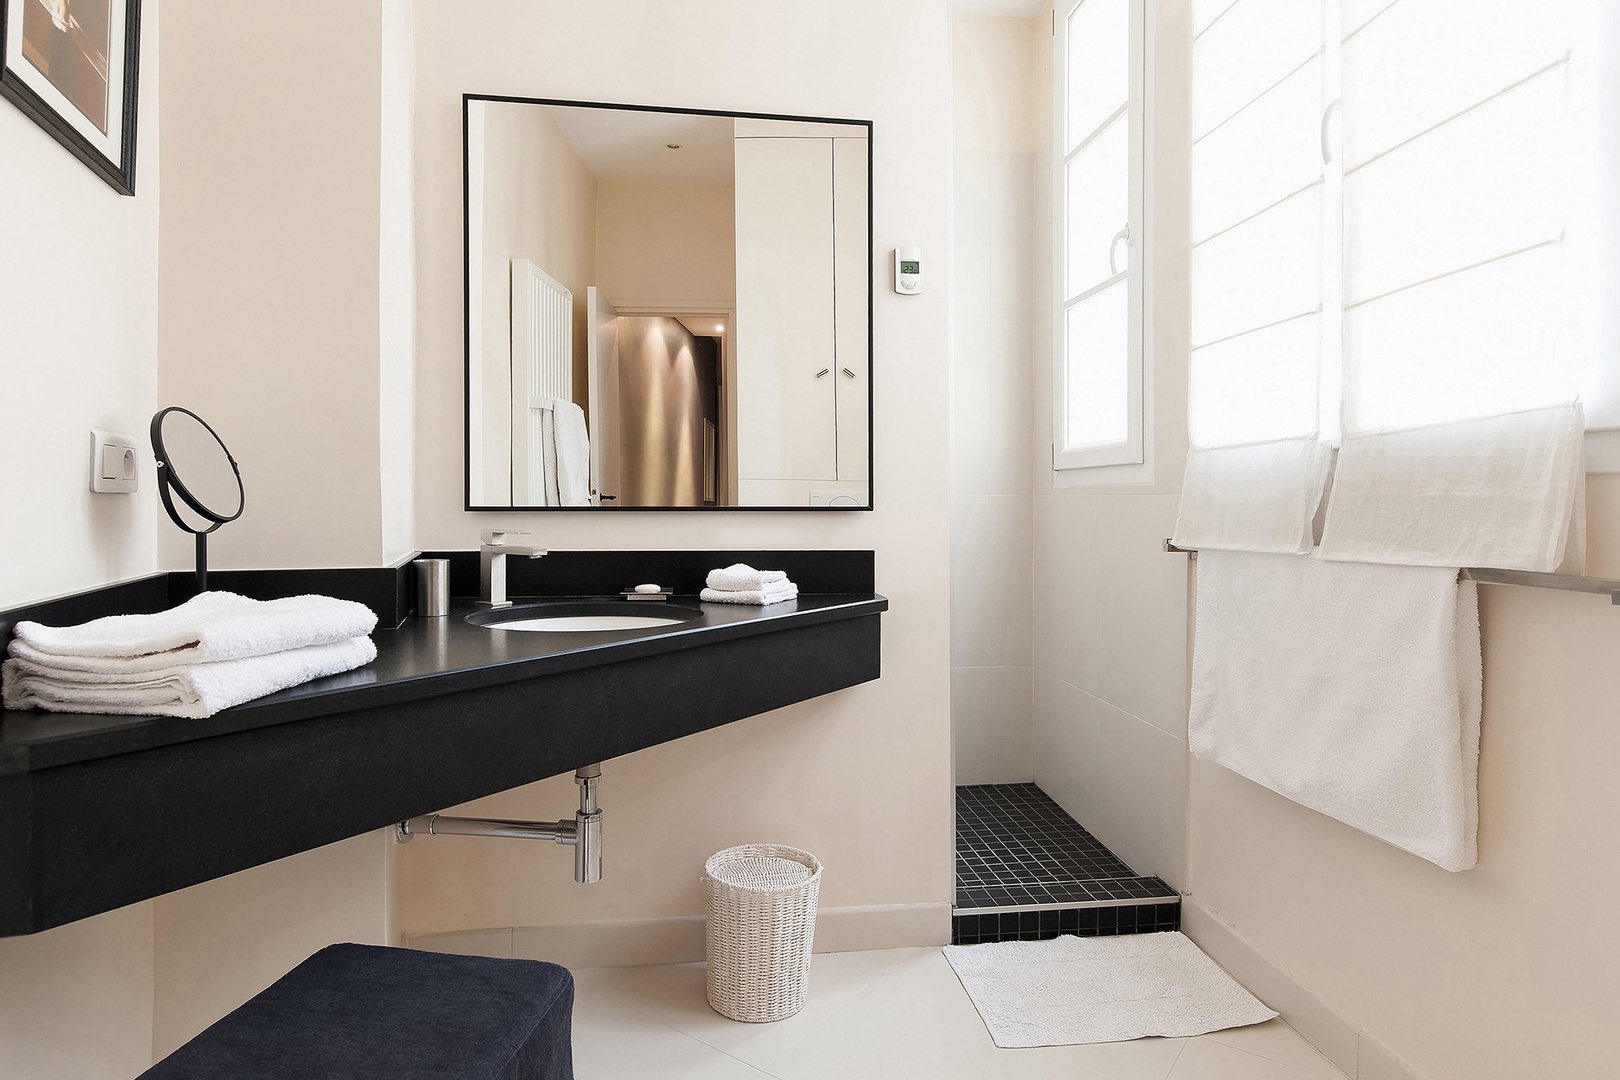 Start your day in this modern and sunny bathroom.